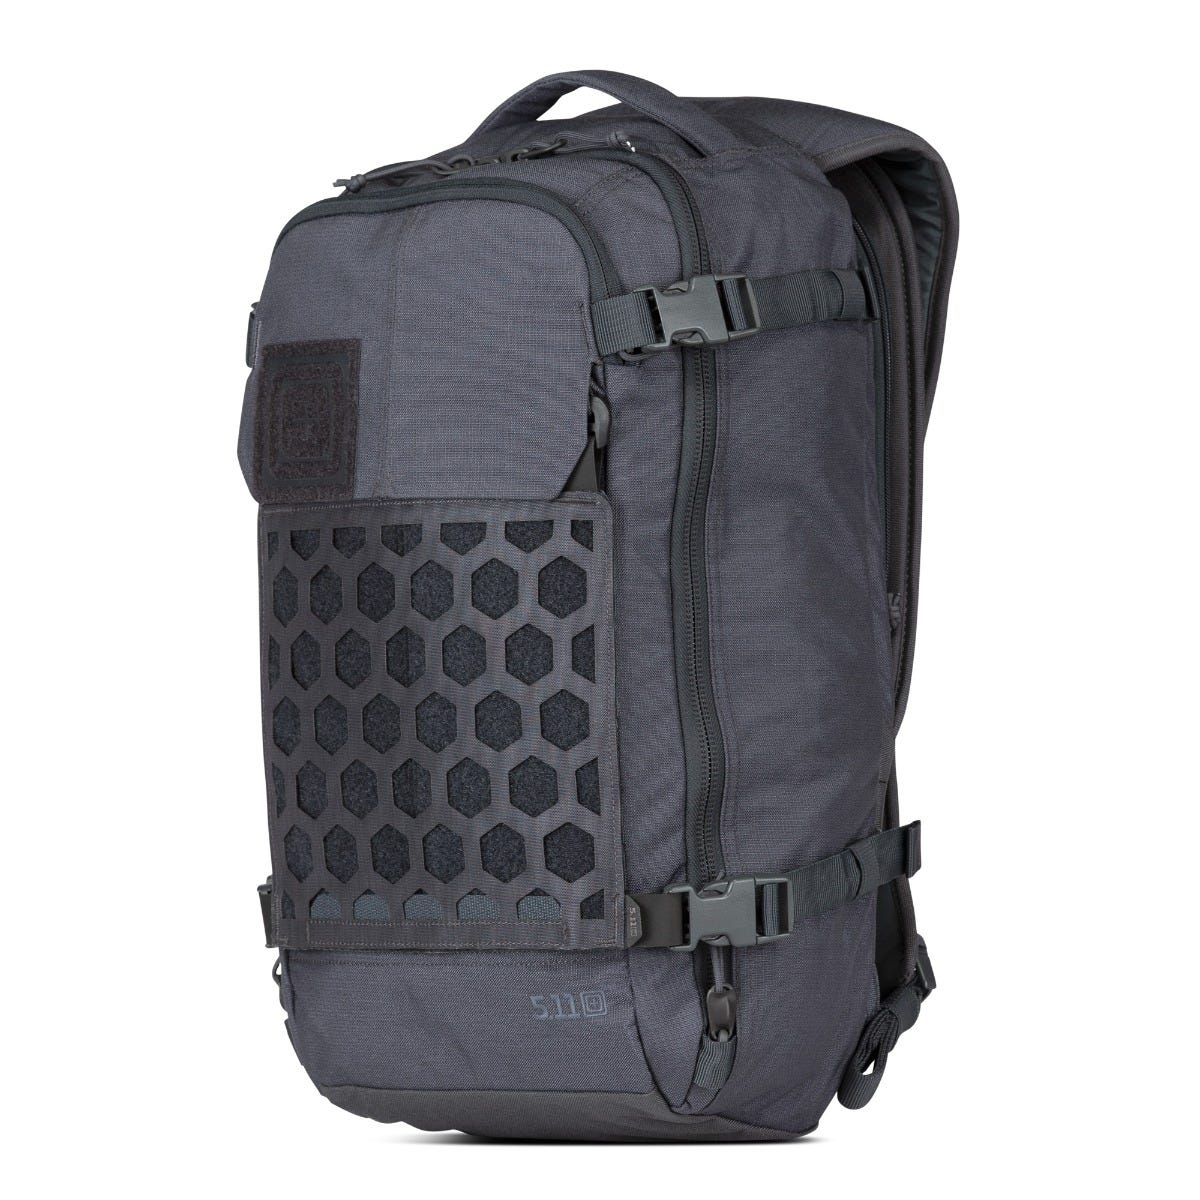 RUSH72™ 2.0 Backpack 55L - 5.11 Tactical